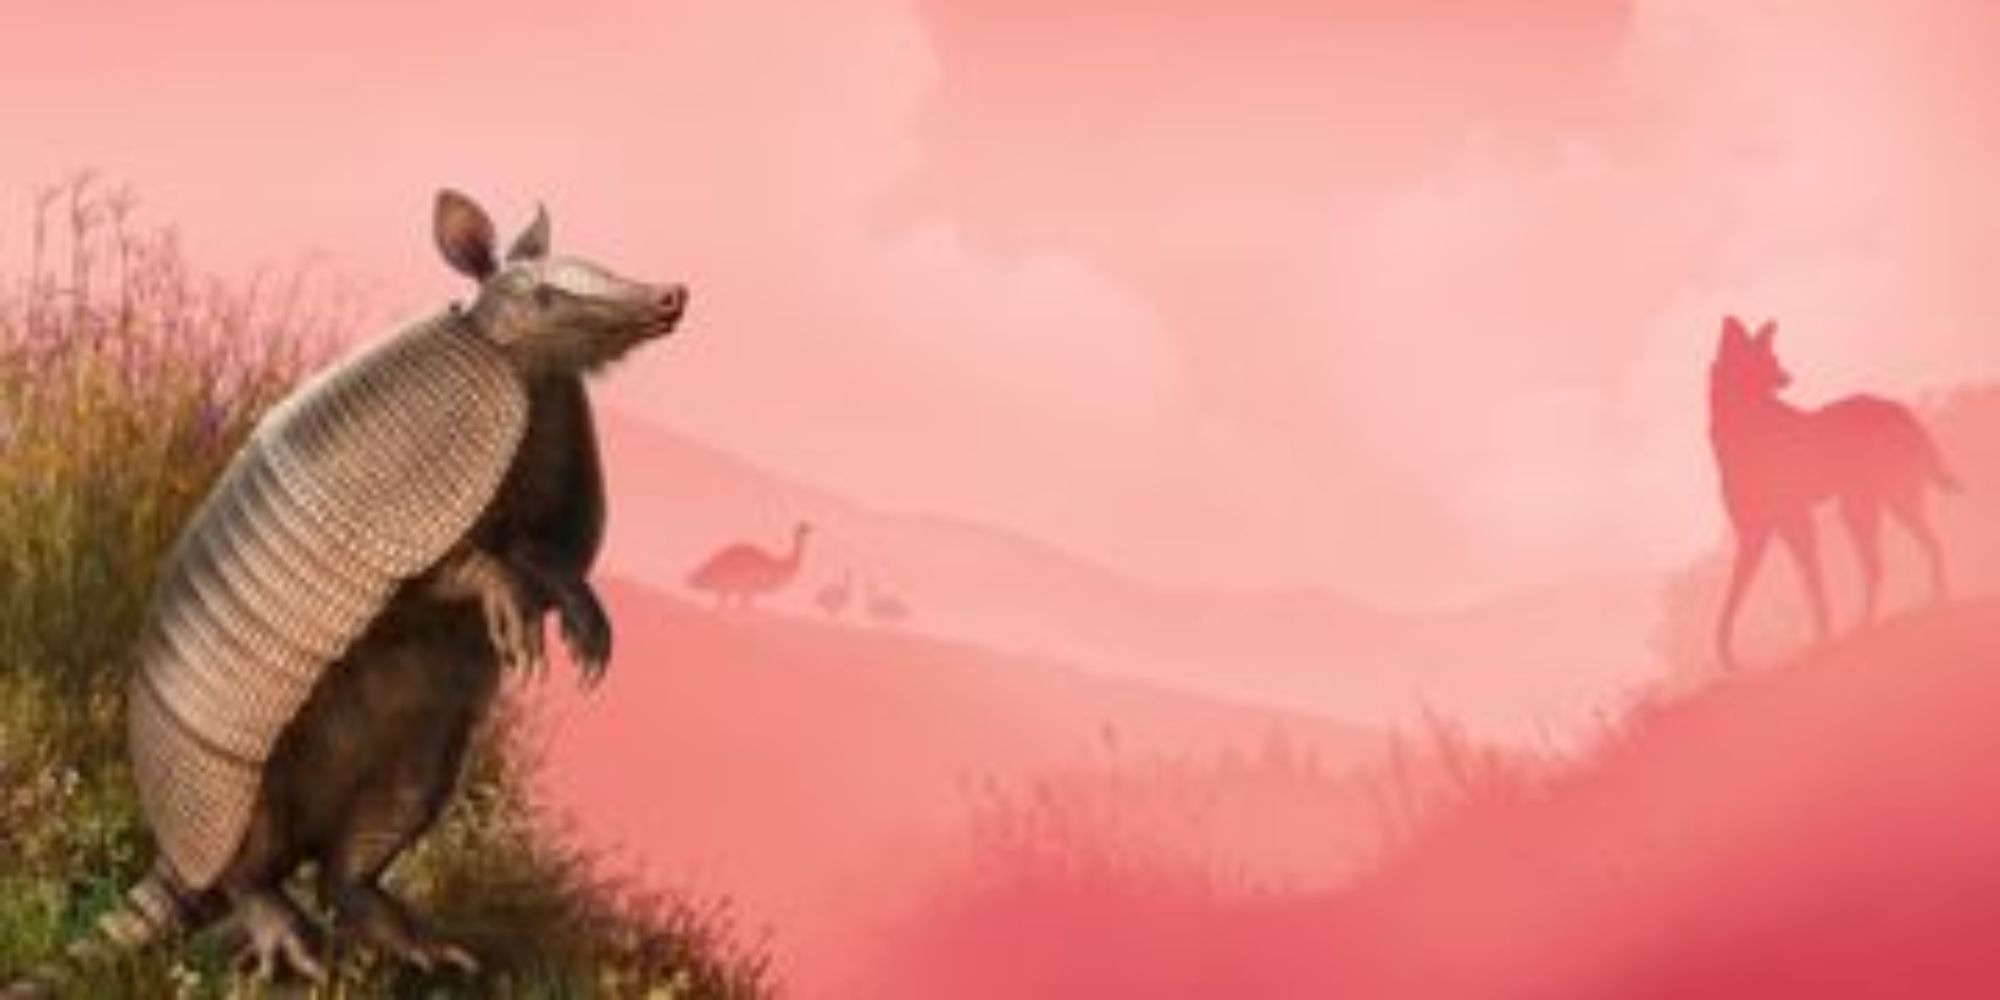 An armadillo standing in front of a pink backgroud with other animal silhouettes in Planet Zoo